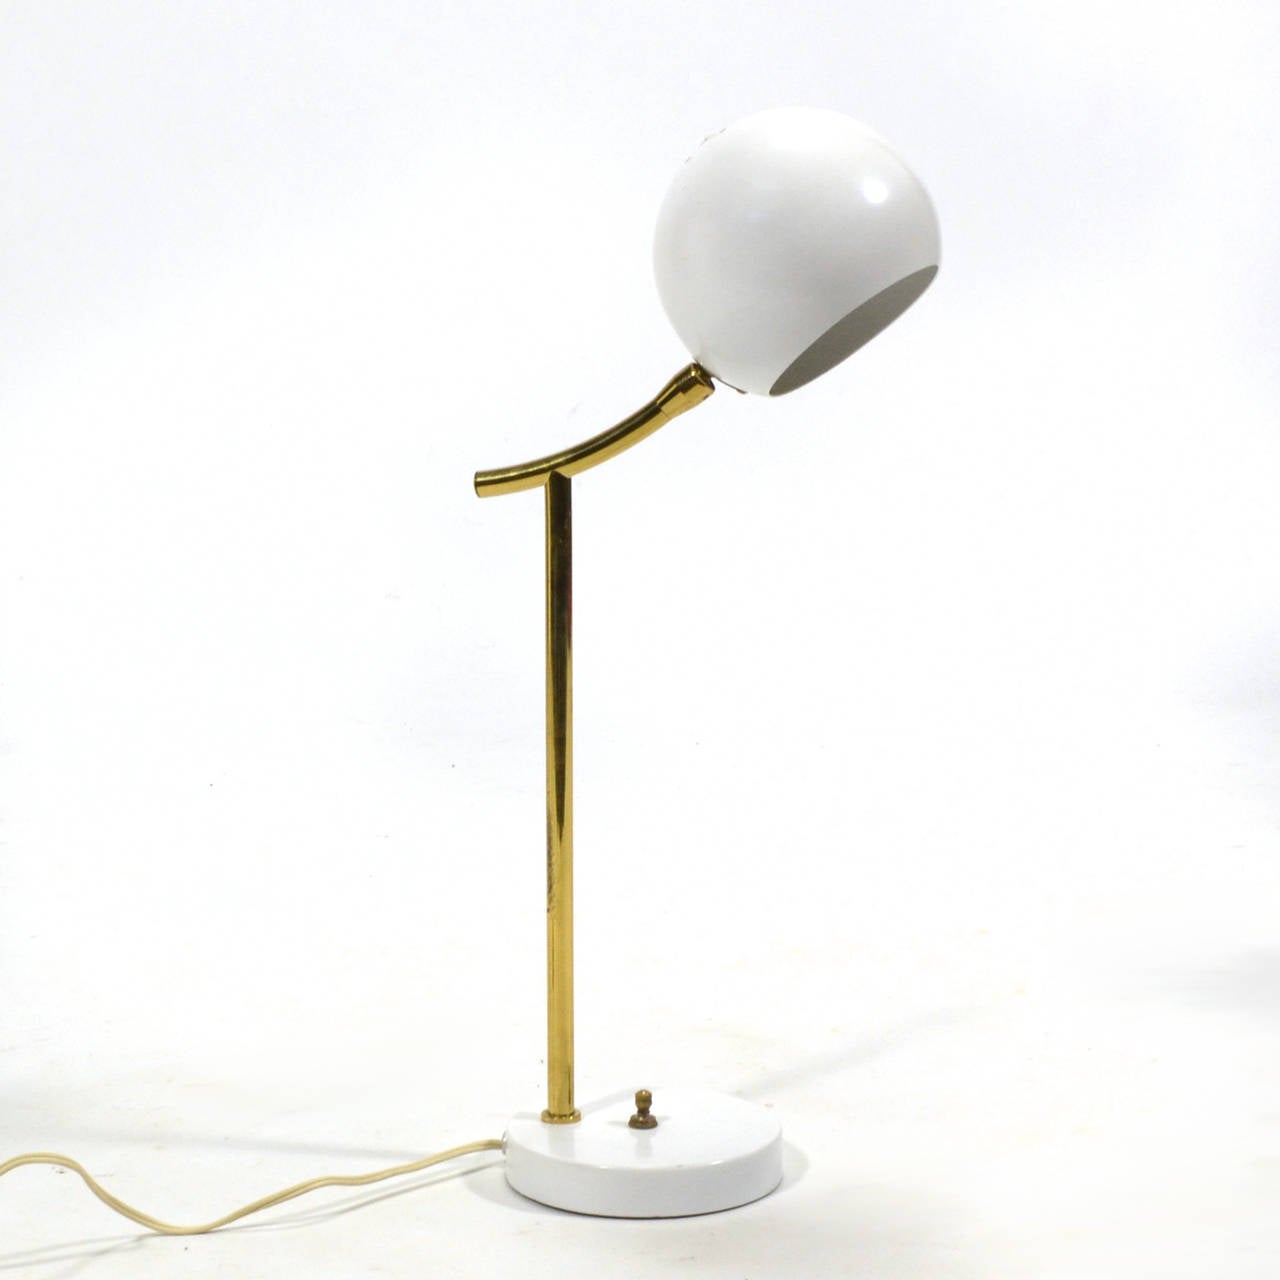 A little lamp is perfect for the desk or table, this wonderful design by Nessen is both playful and sophisticated. A white base and head is connected by a brass stem or neck which offers both ambient and Directional light.